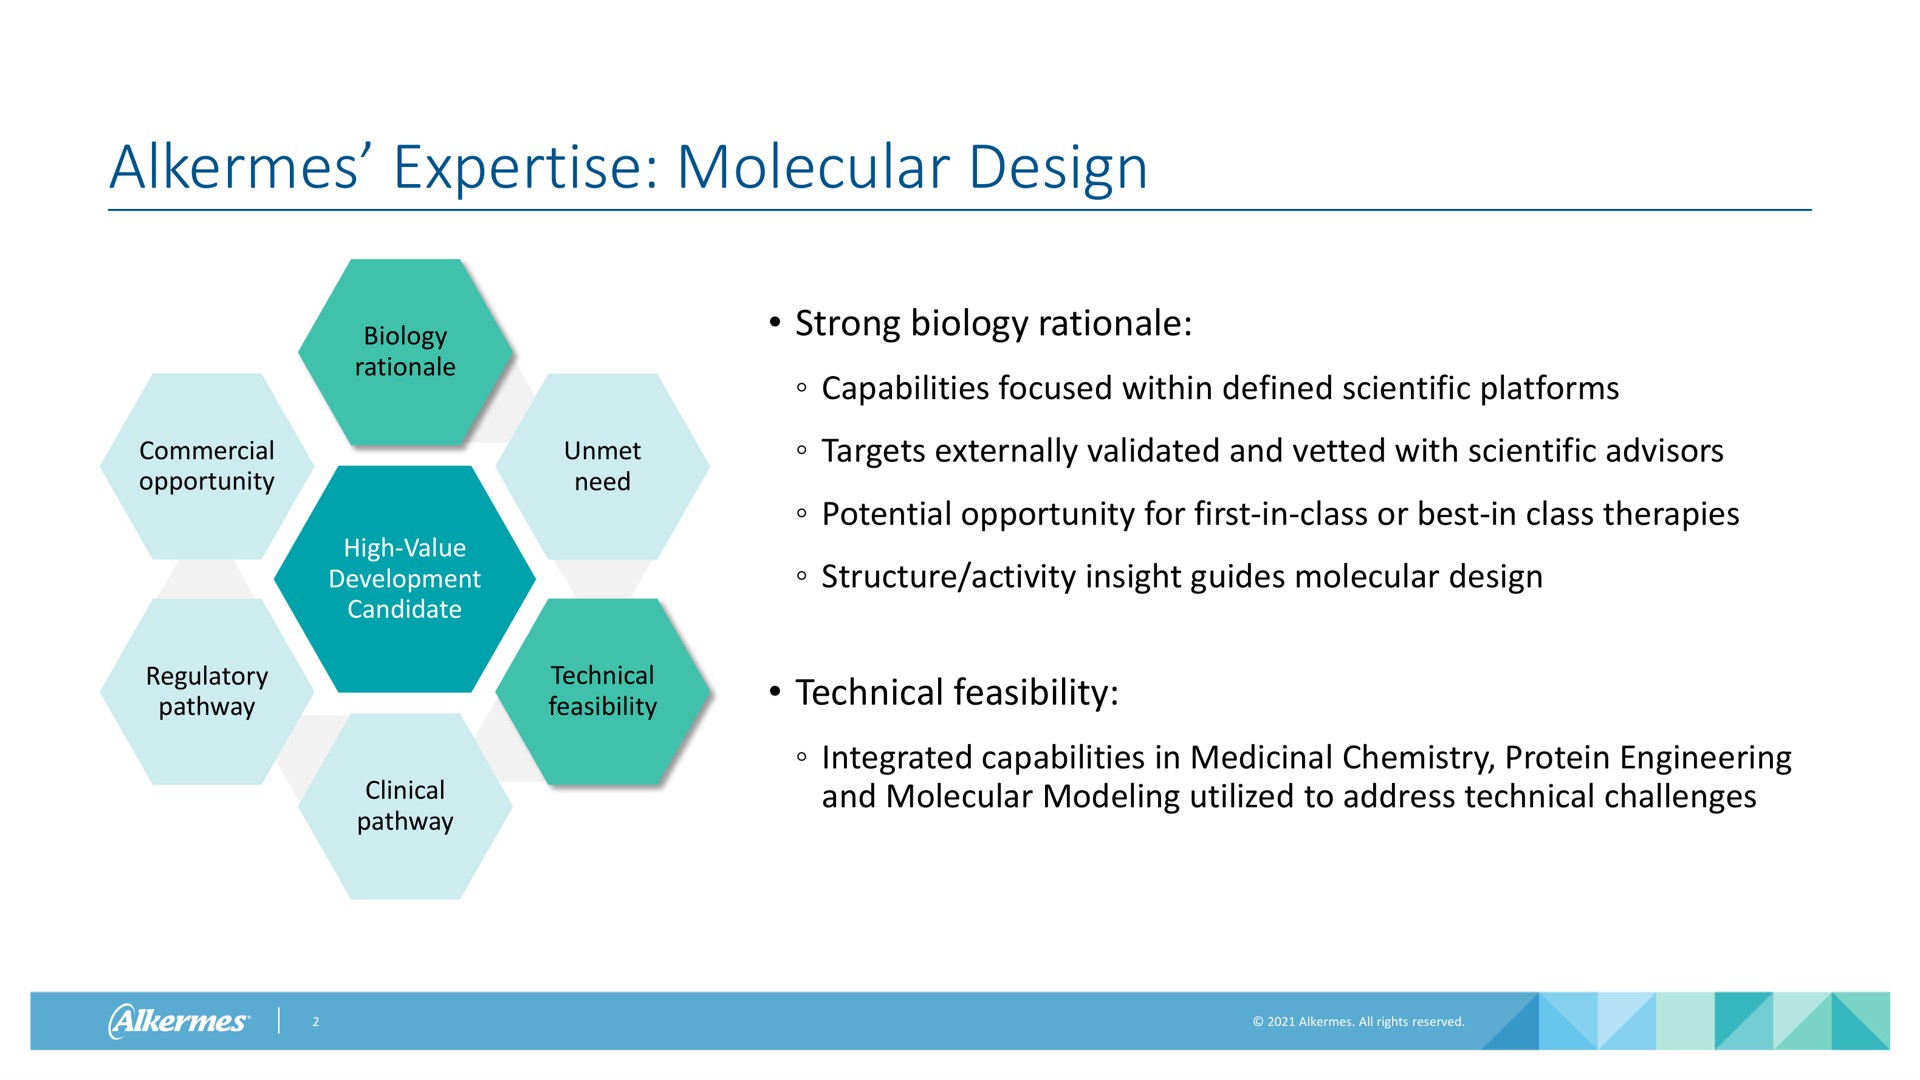 alkermes molecular design biology rationale commercial opportunity unmet need high value development candidate strong biology rationale capabilities focused within defined scientific platforms targets externally validated and vetted with scientific advisors potential opportunity for first in class or best in class therapies structure activity insight guides molecular design regulatory pathway technical feasibility technical feasibility clinical pathway integrated capabilities in medicinal chemistry protein engineering and molecular modeling utilized to address technical challenges | Alkermes